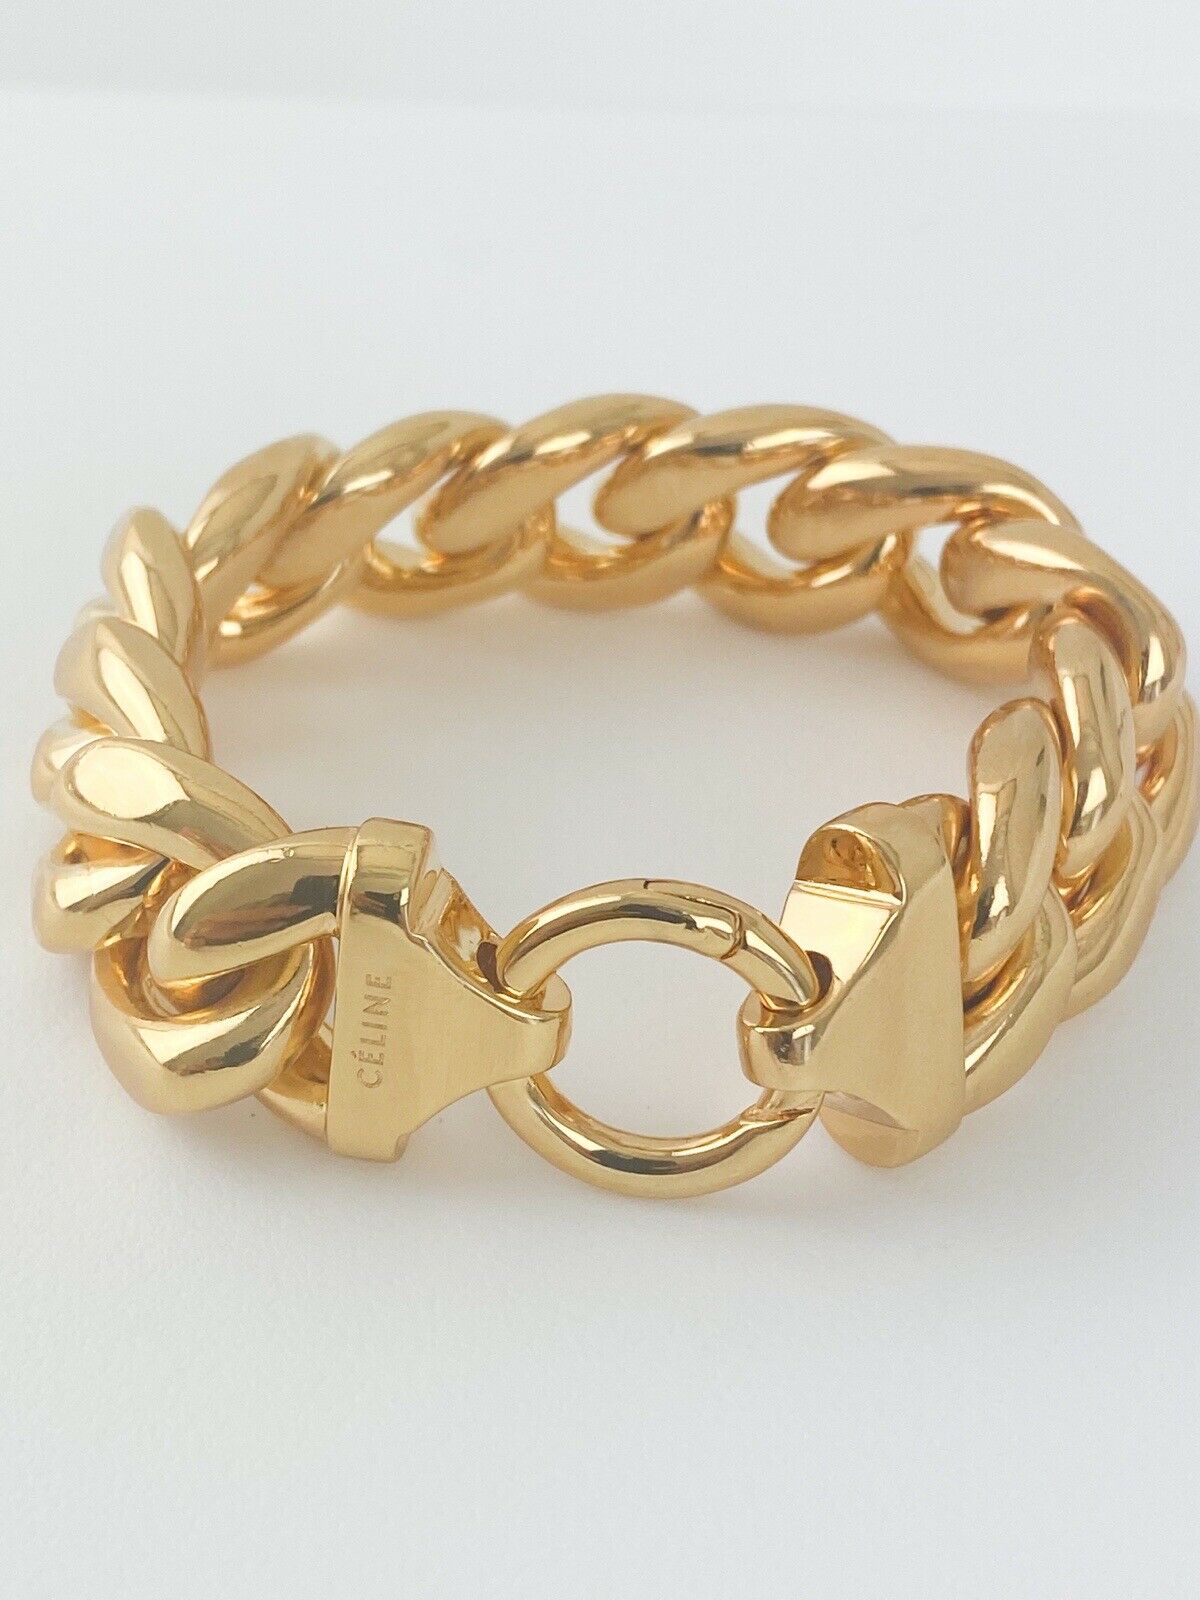 【SOLD OUT】Celine Vintage Gold Tone Phoebe Philo Chain Bracelet Made in Italy